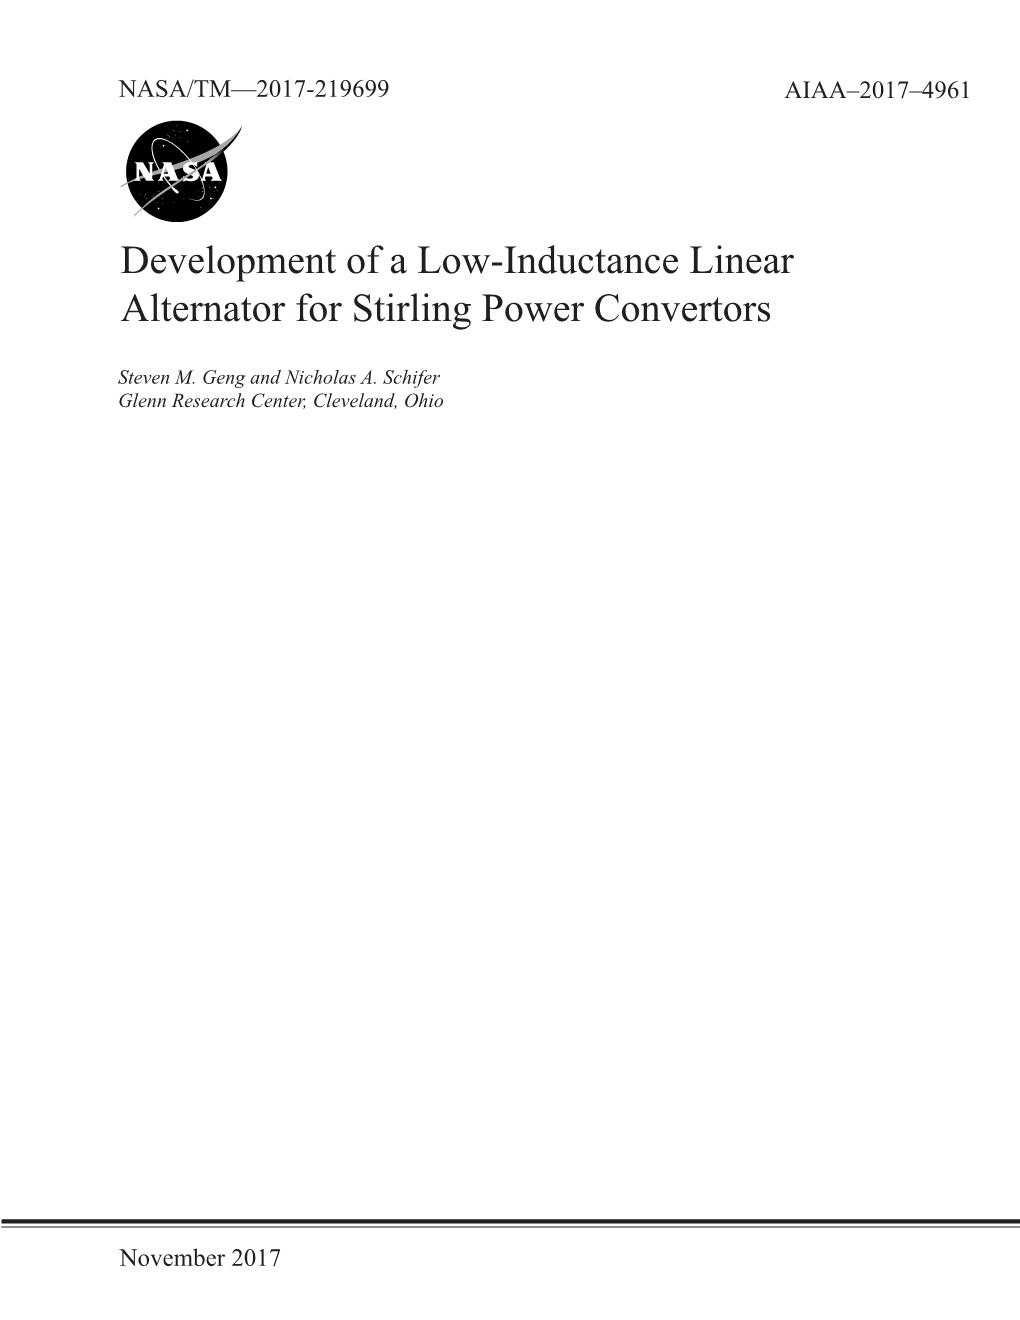 Development of a Low-Inductance Linear Alternator for Stirling Power Convertors